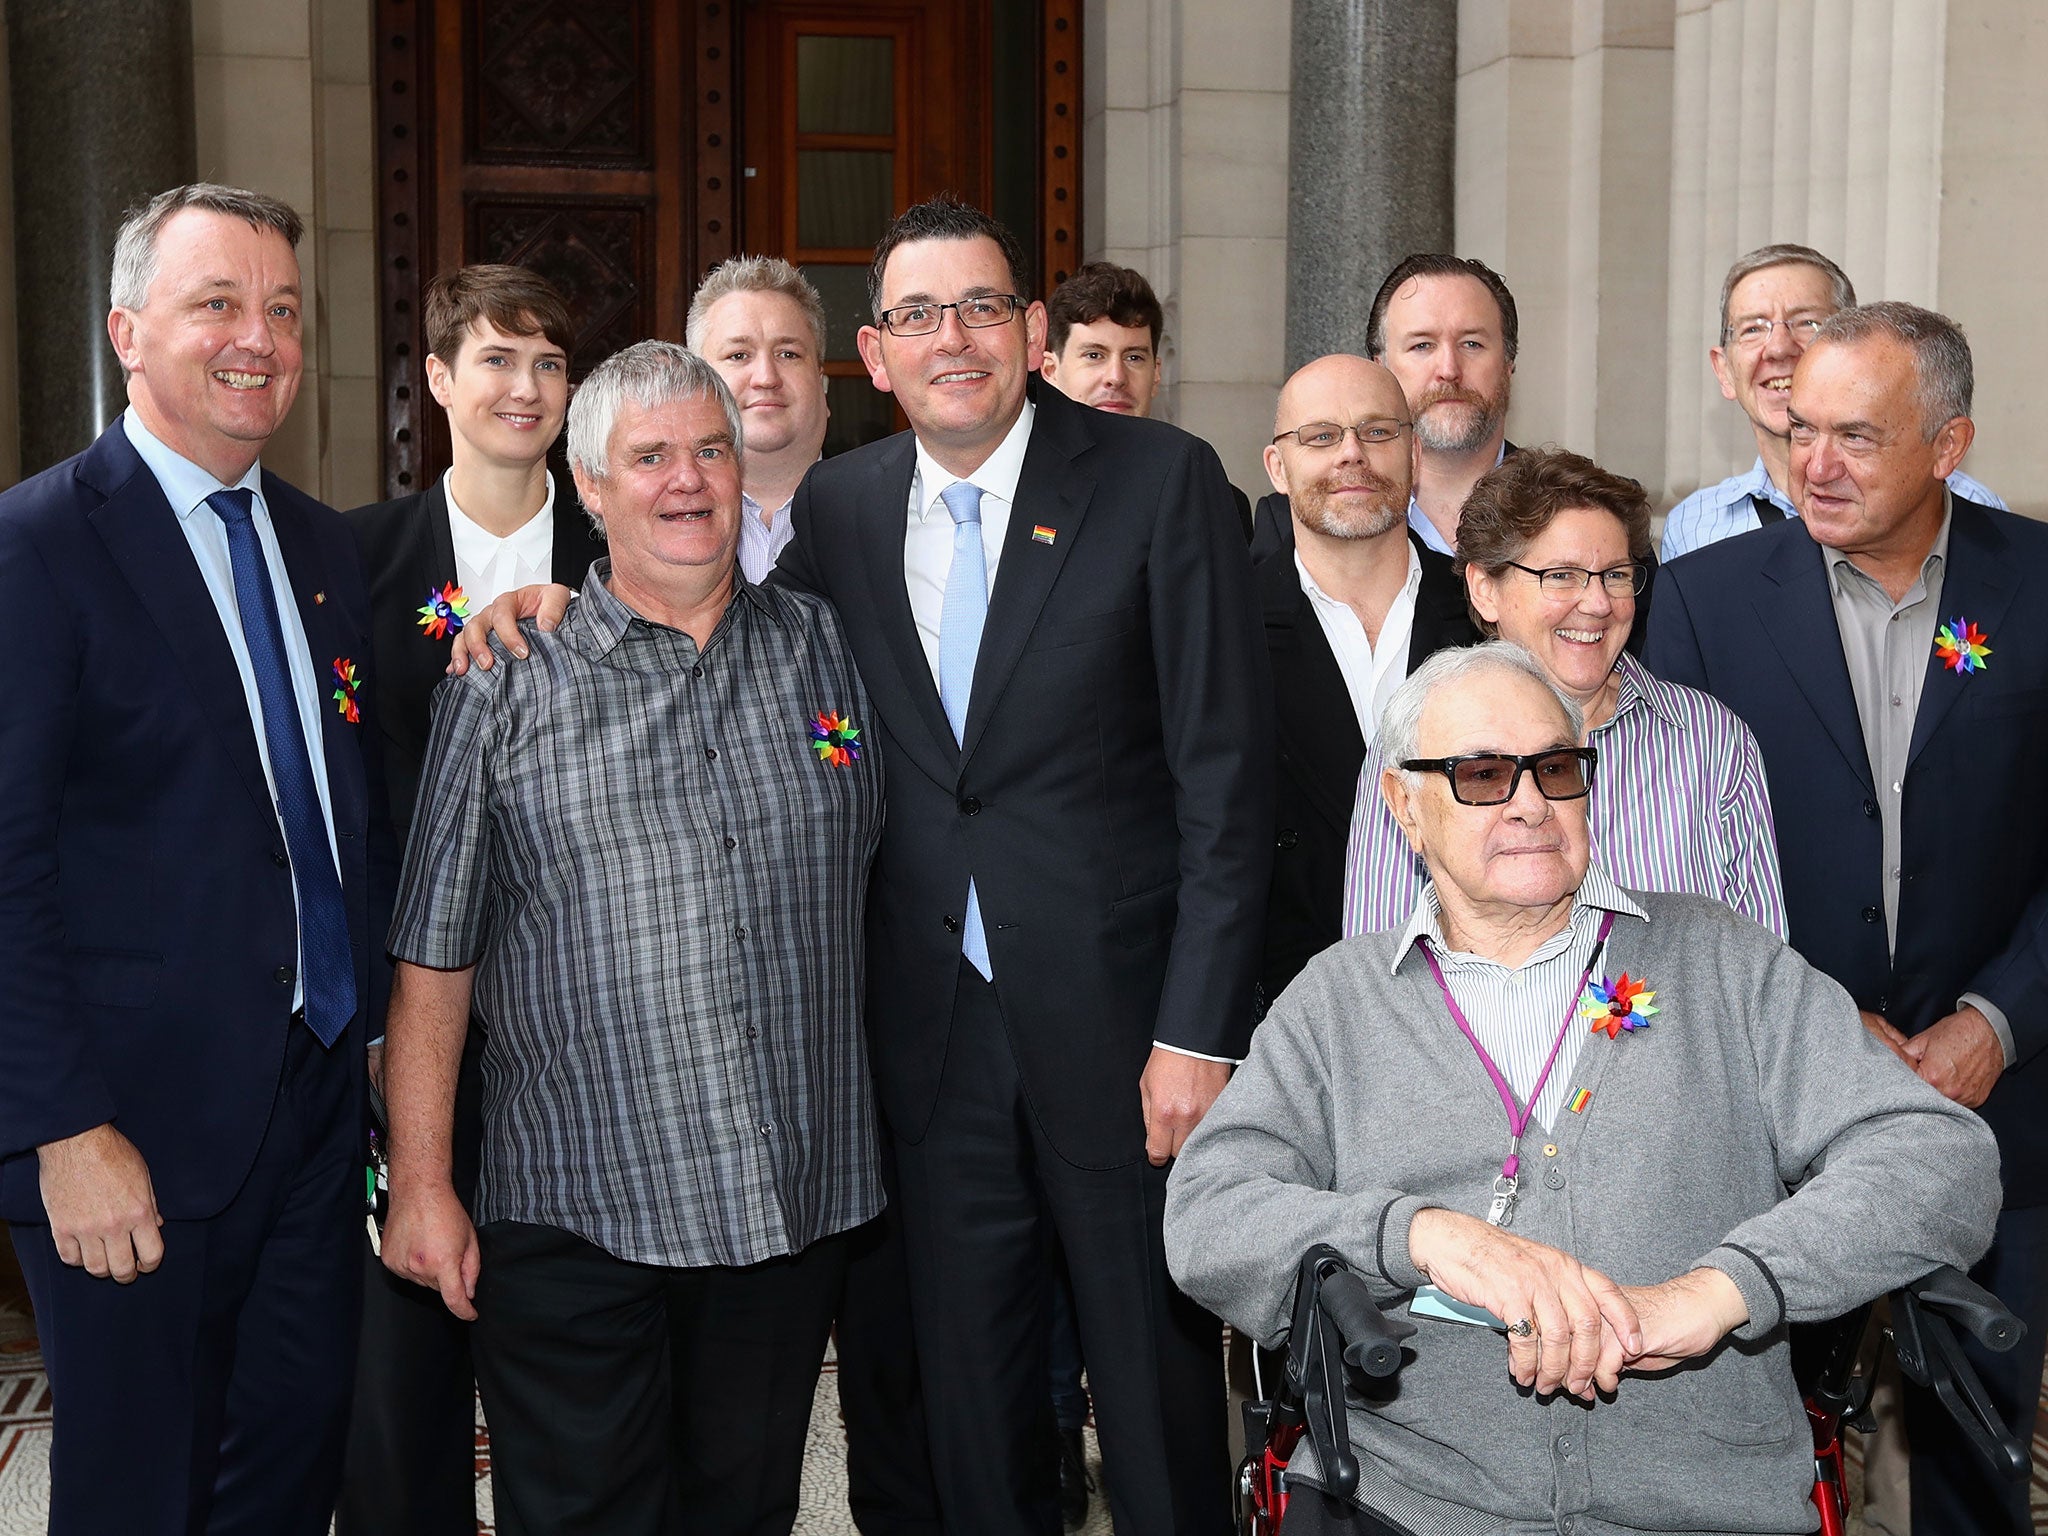 Premier Daniel Andrews poses with former victims and representitives, before making an apology to the Victorian Gay community at Parliament House